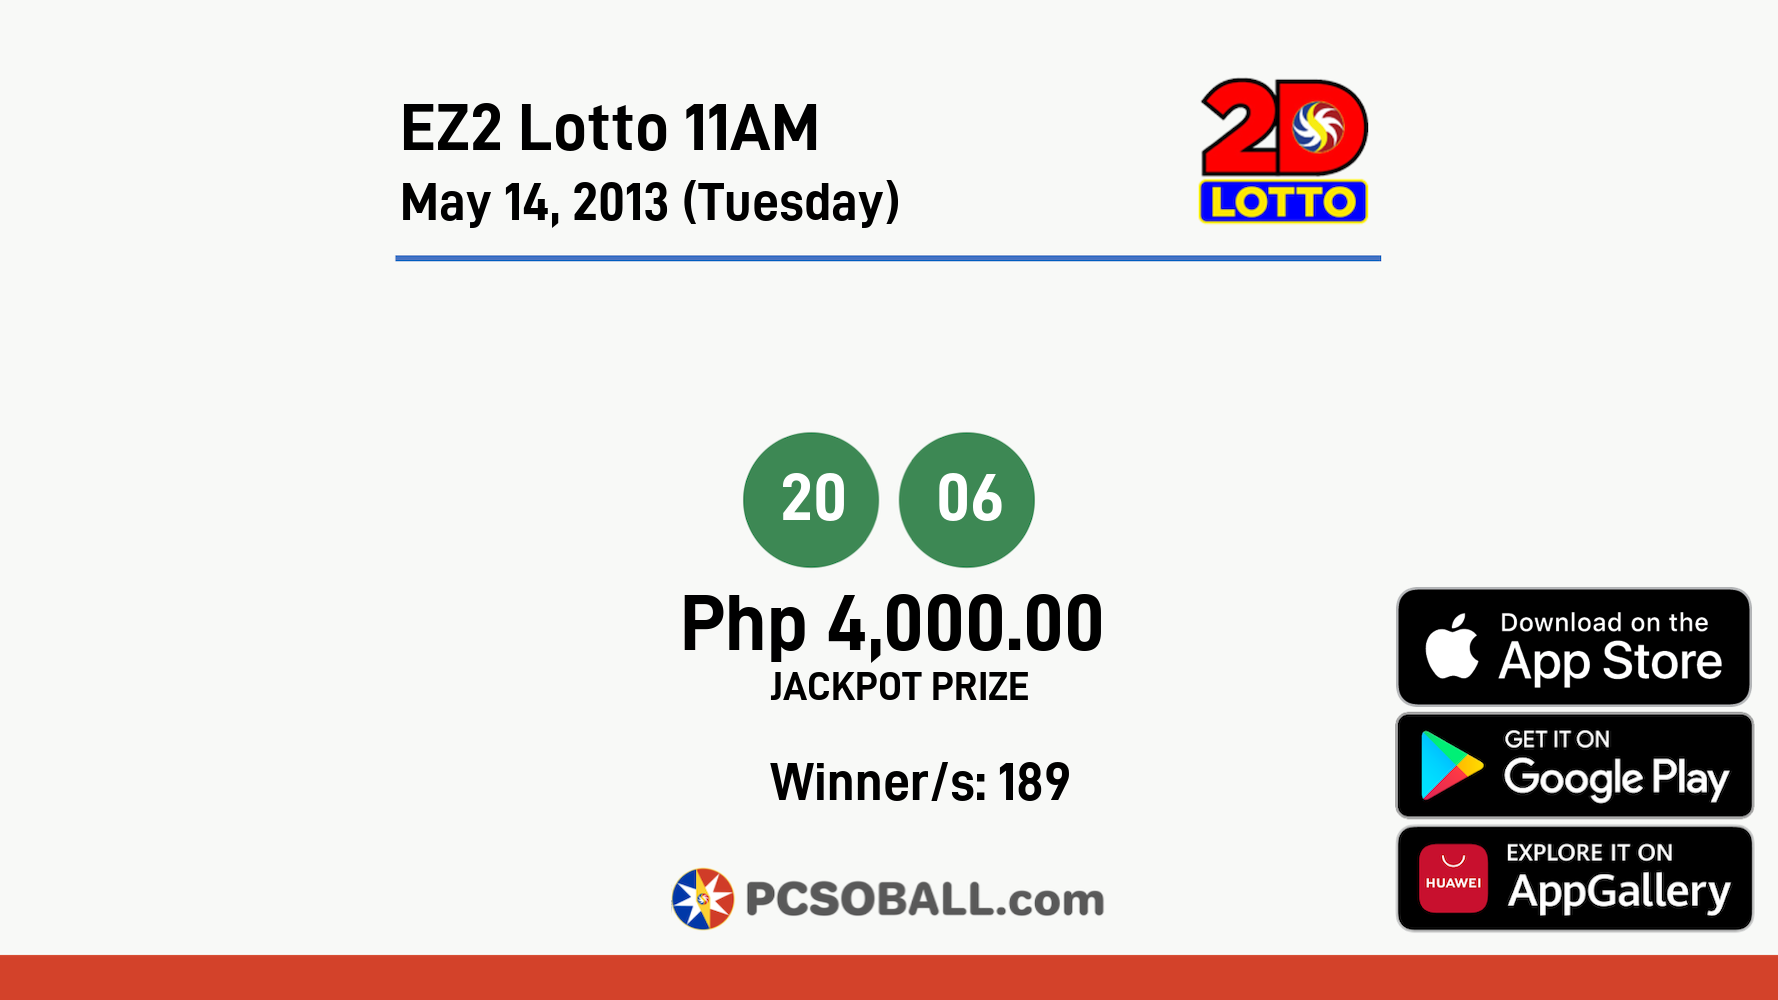 EZ2 Lotto 11AM May 14, 2013 (Tuesday) Result